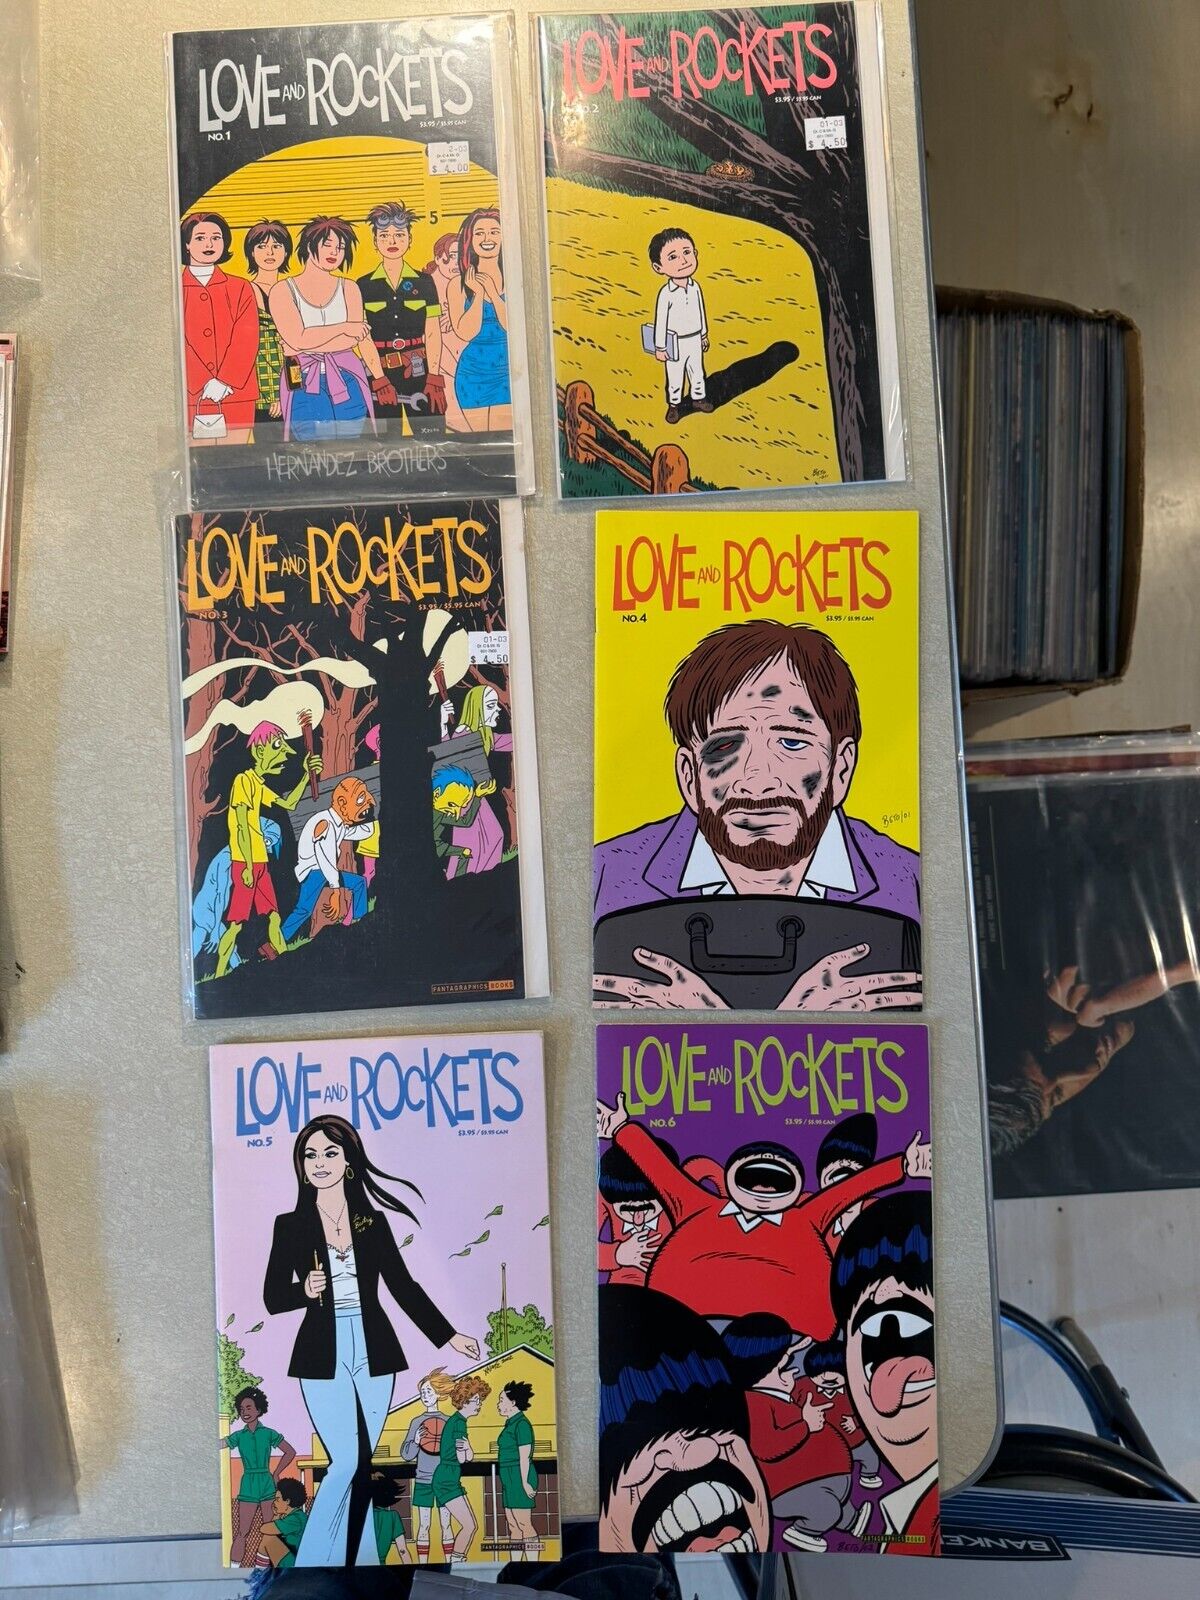 Lot of 6 - Love And Rockets - #1 thru #6 - Hernandez Brothers VG+ 2001/2002